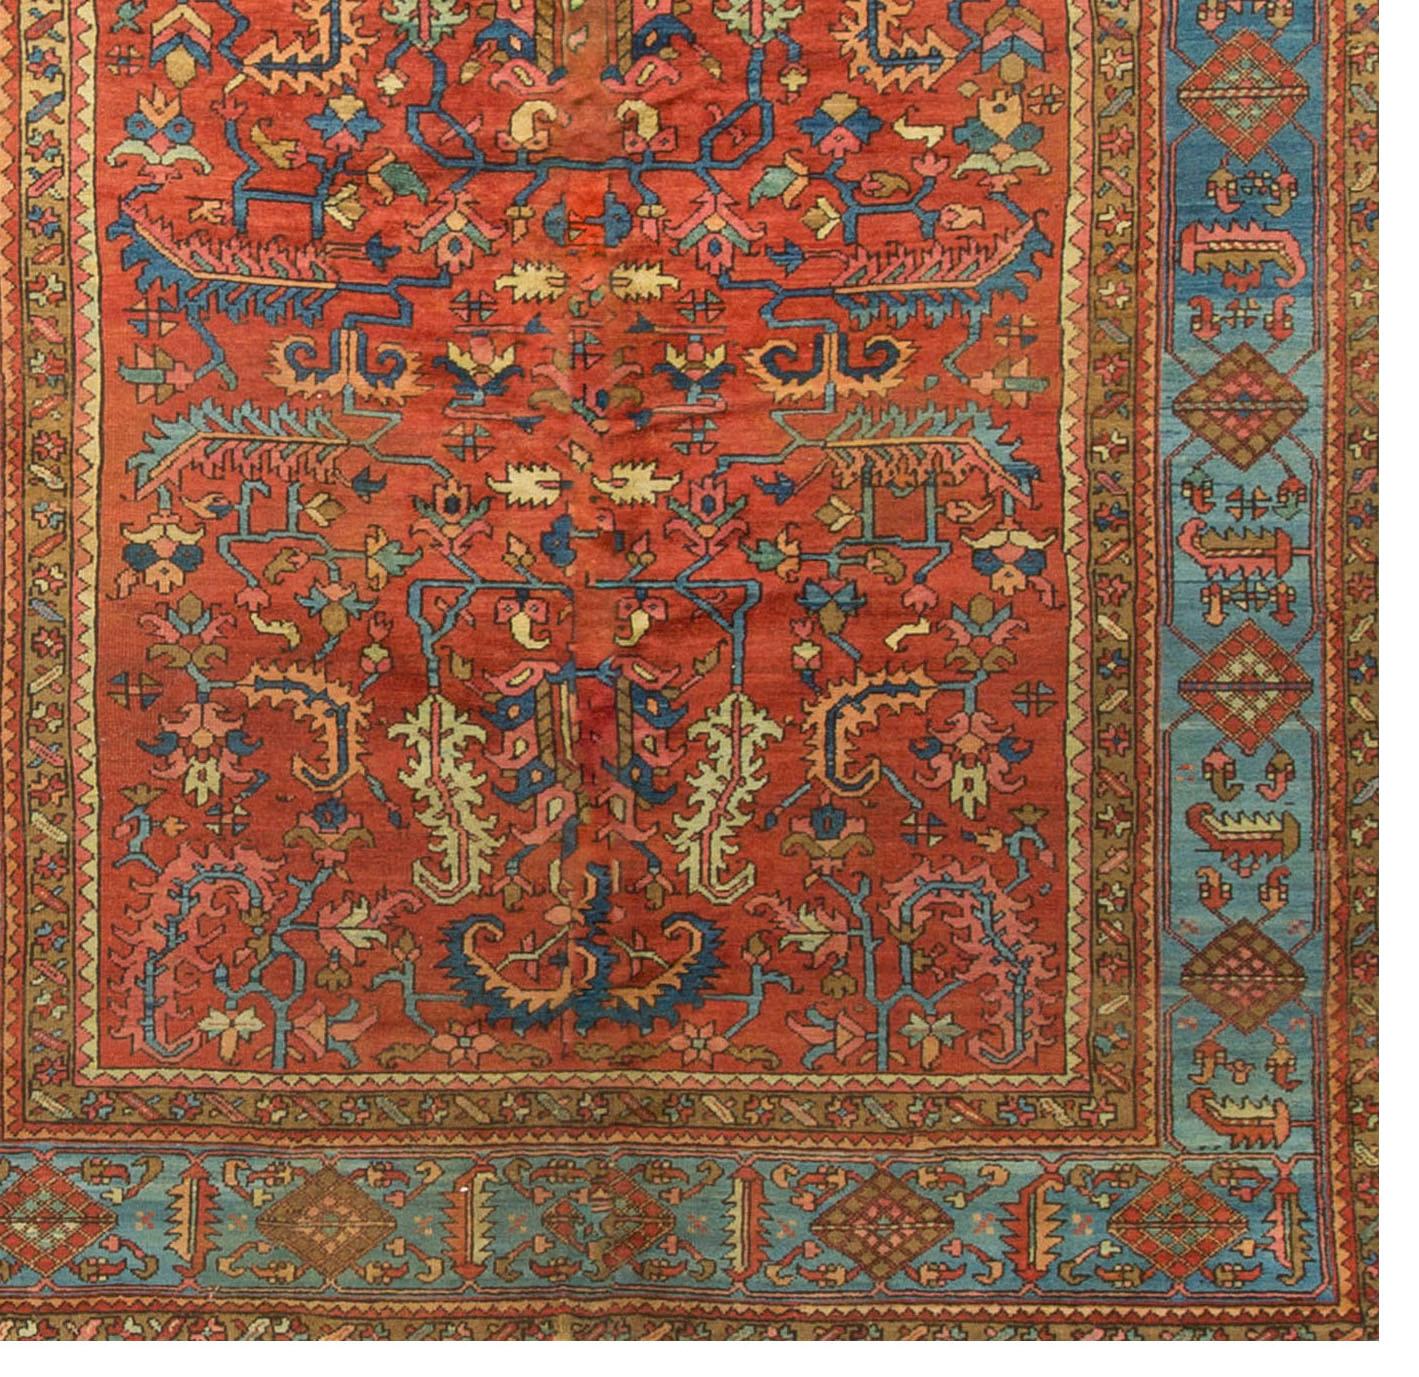 As perpetually fashionable as they are collectible, traditional Heriz rugs are skillfully woven in vibrant colors and emphatic geometric designs. This Heriz has a character all its own and will become a natural focal point in any setting.